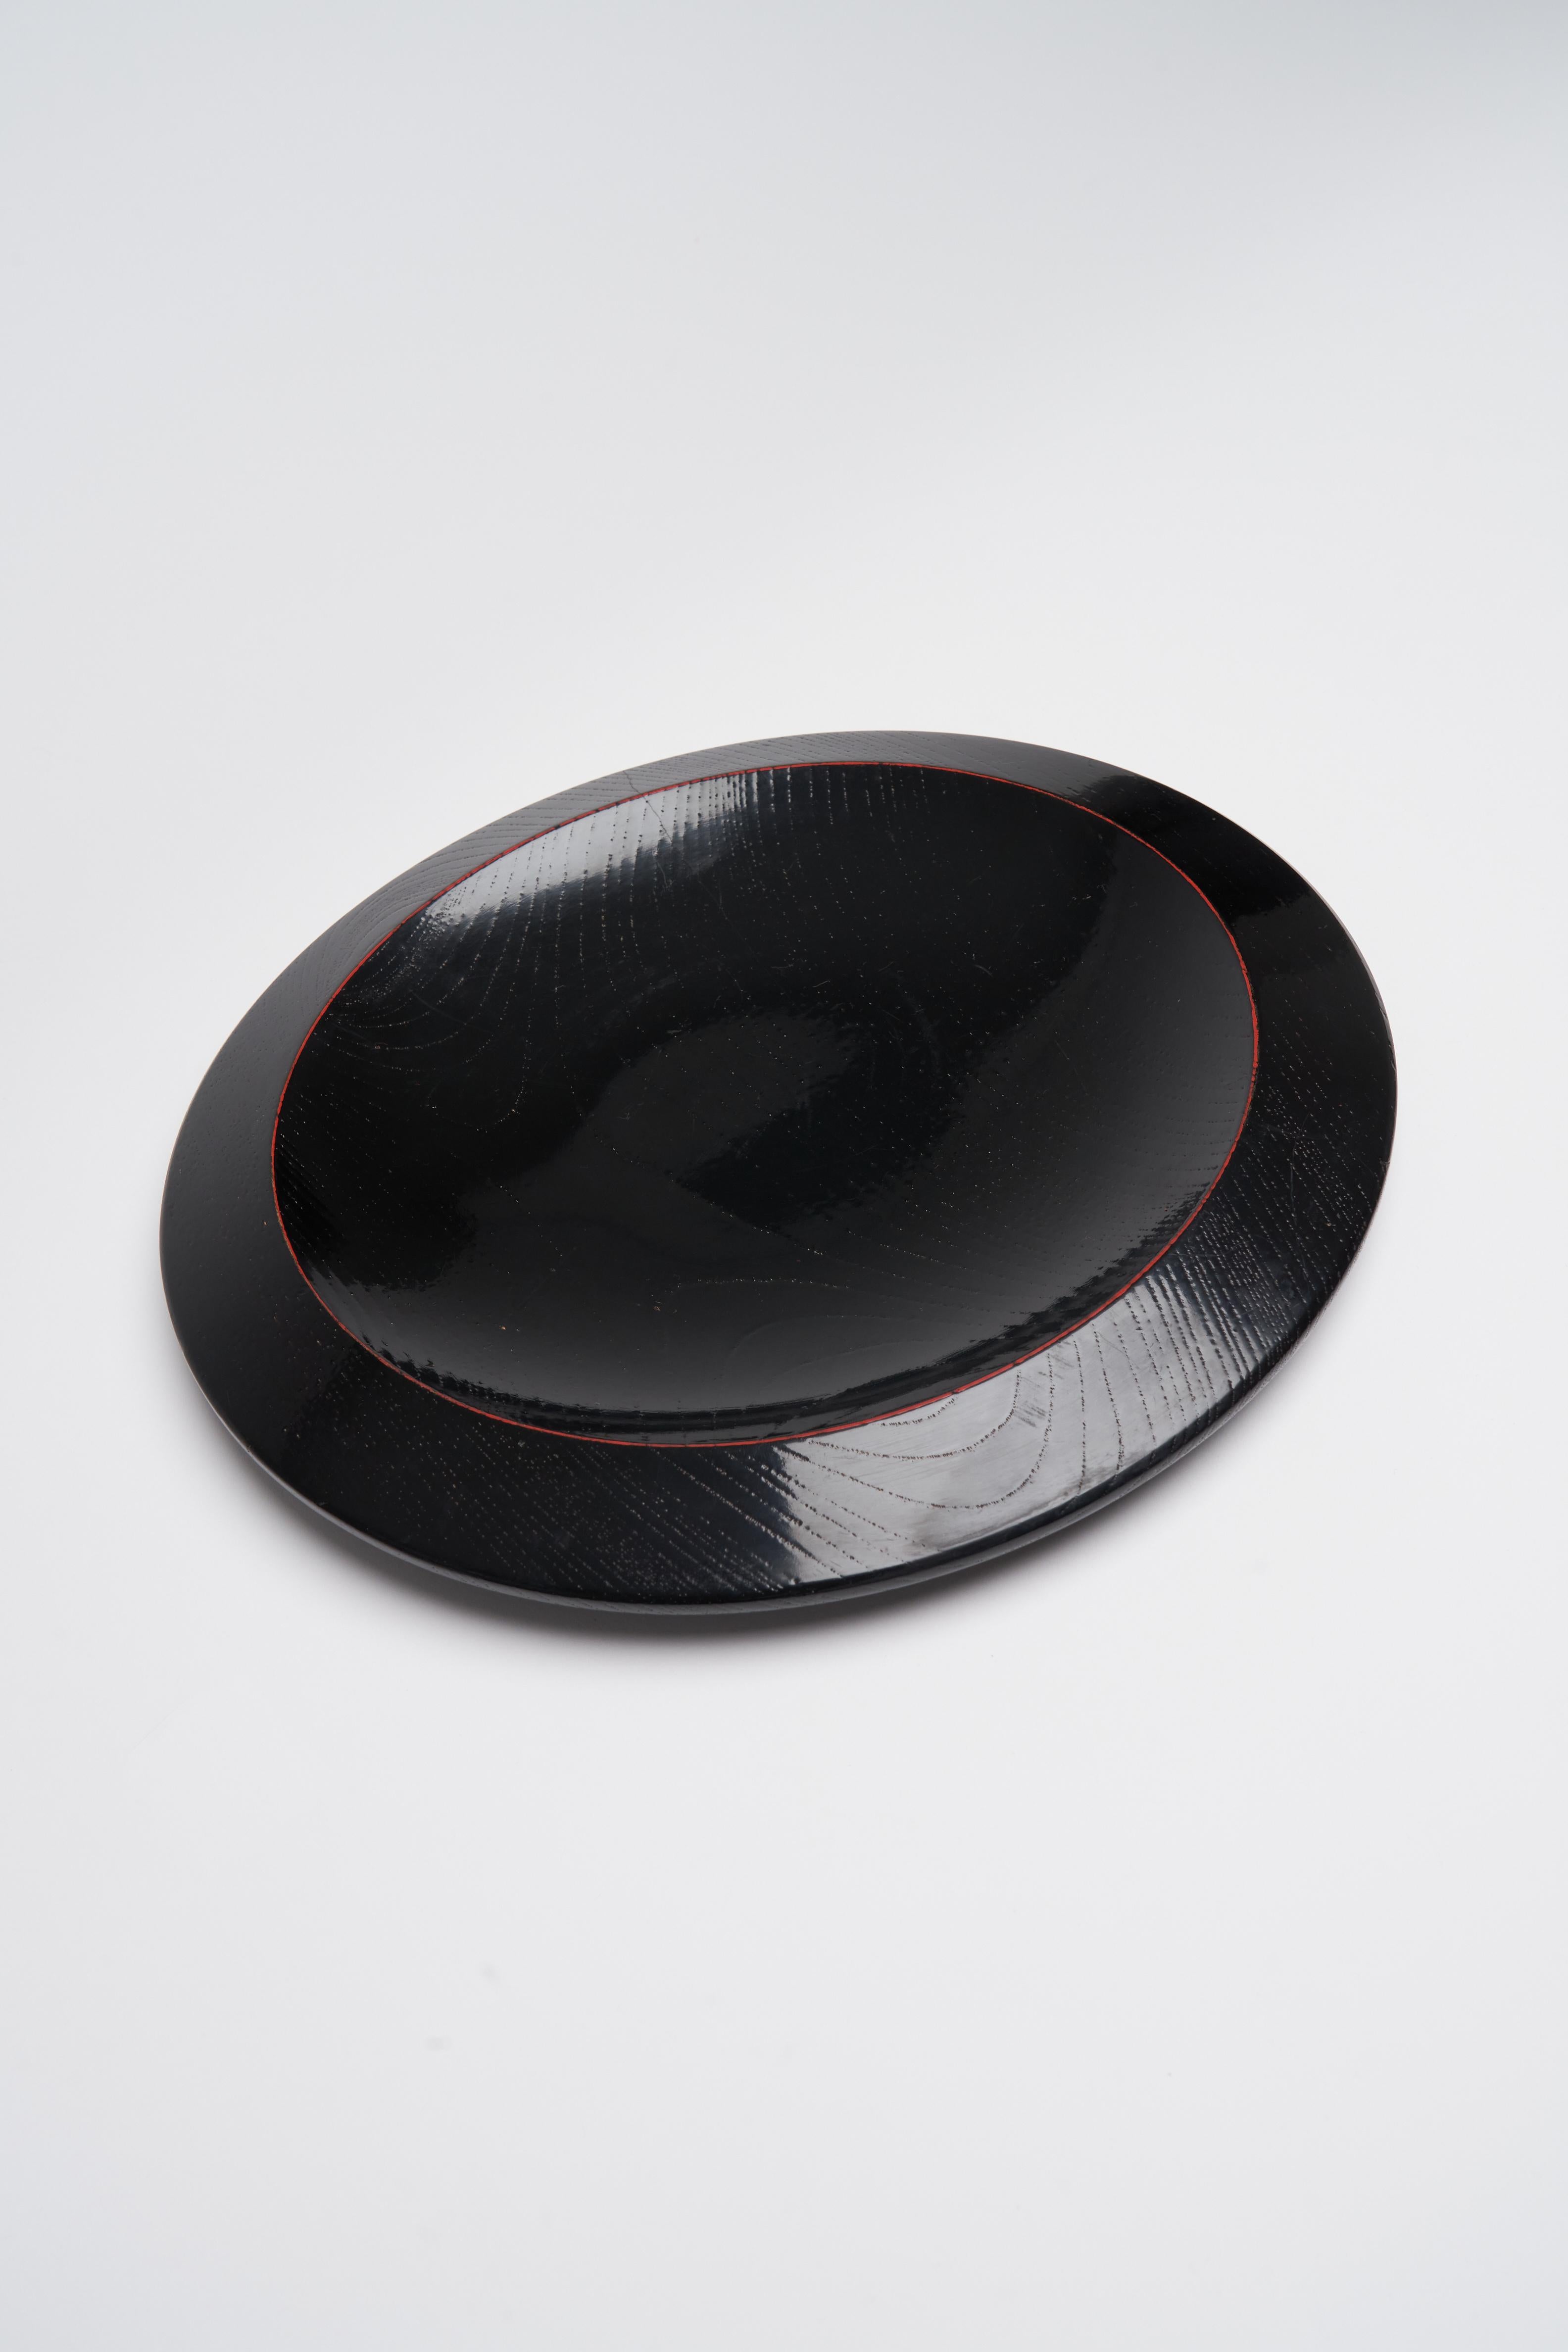 This stunning wooden tray adorned with the classic Japanese Lacquer shines back at you - almost to mirror your every desire. You must see yourself in this plate. Concave and convex. Shaped with shapes that defy your own logic of what a plate can be.